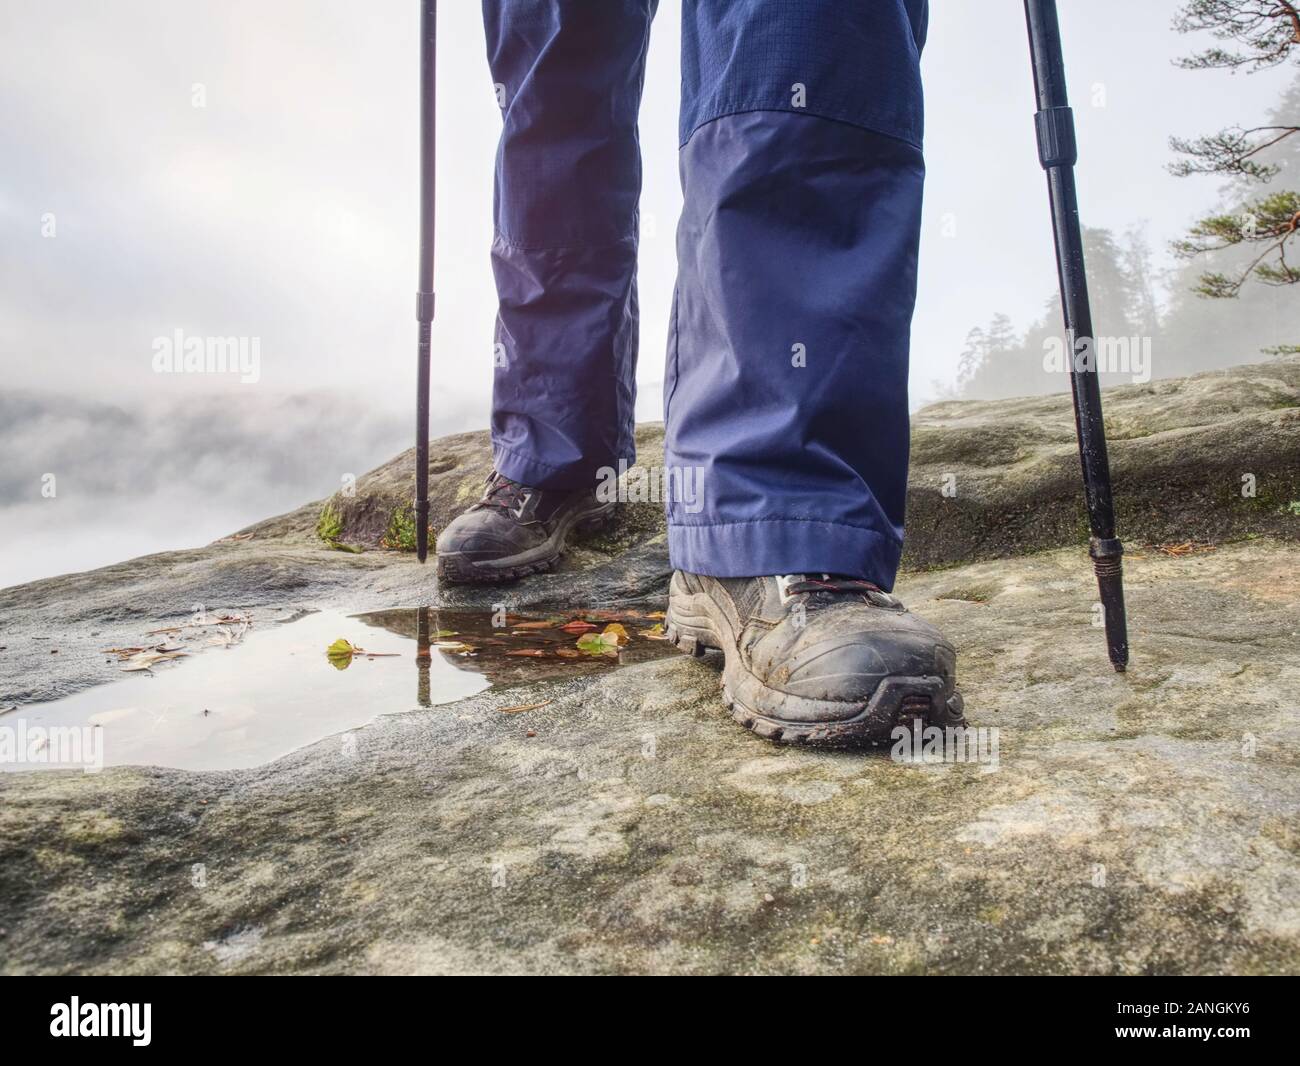 Woman legs in high waterproof boots make step over water pool on the rocky journey. Misty rainy weather in mountains Stock Photo